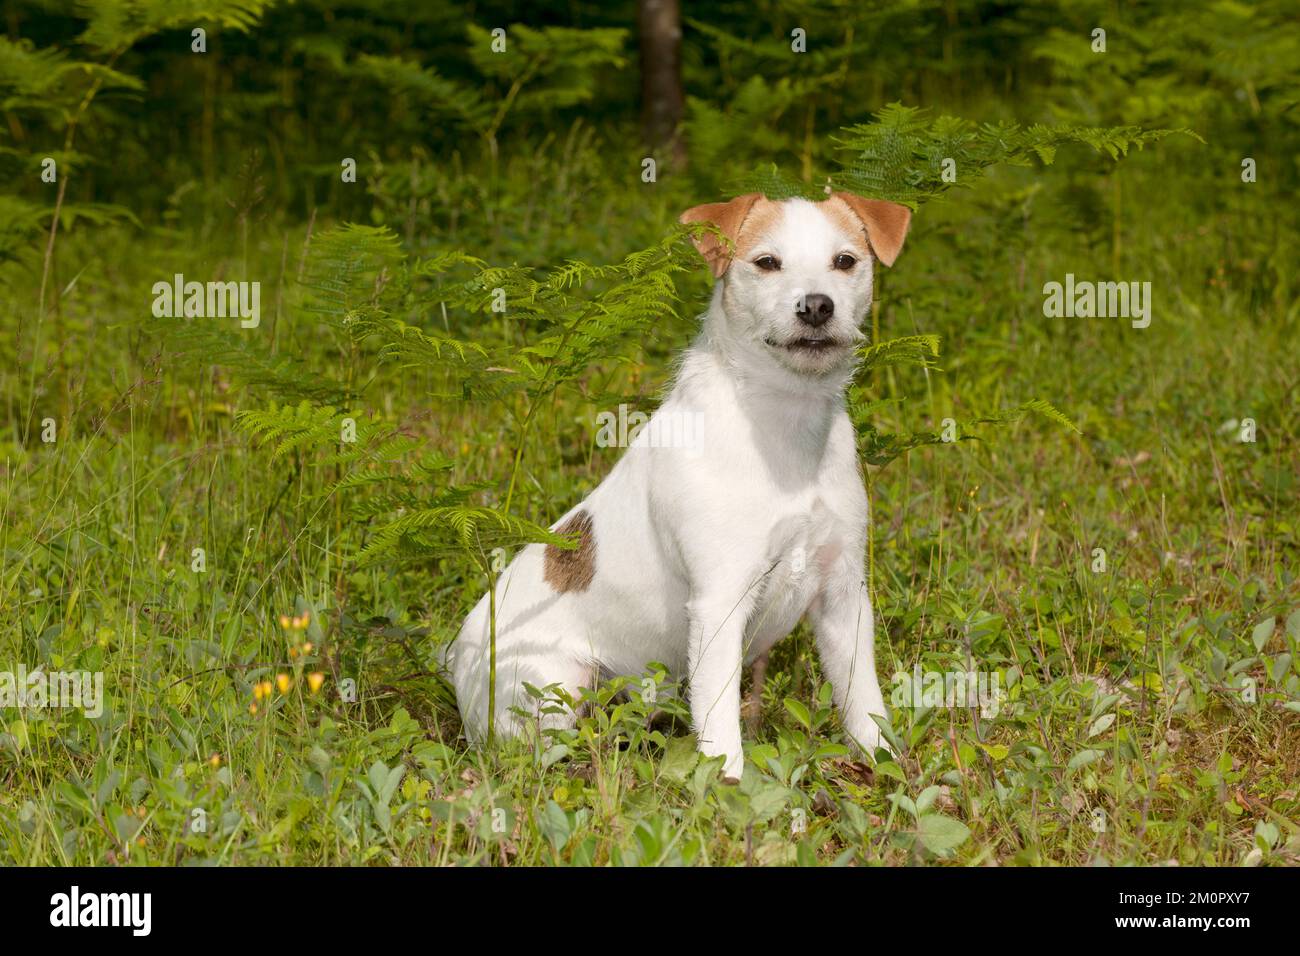 CANE - Jack Russell terrier Foto Stock